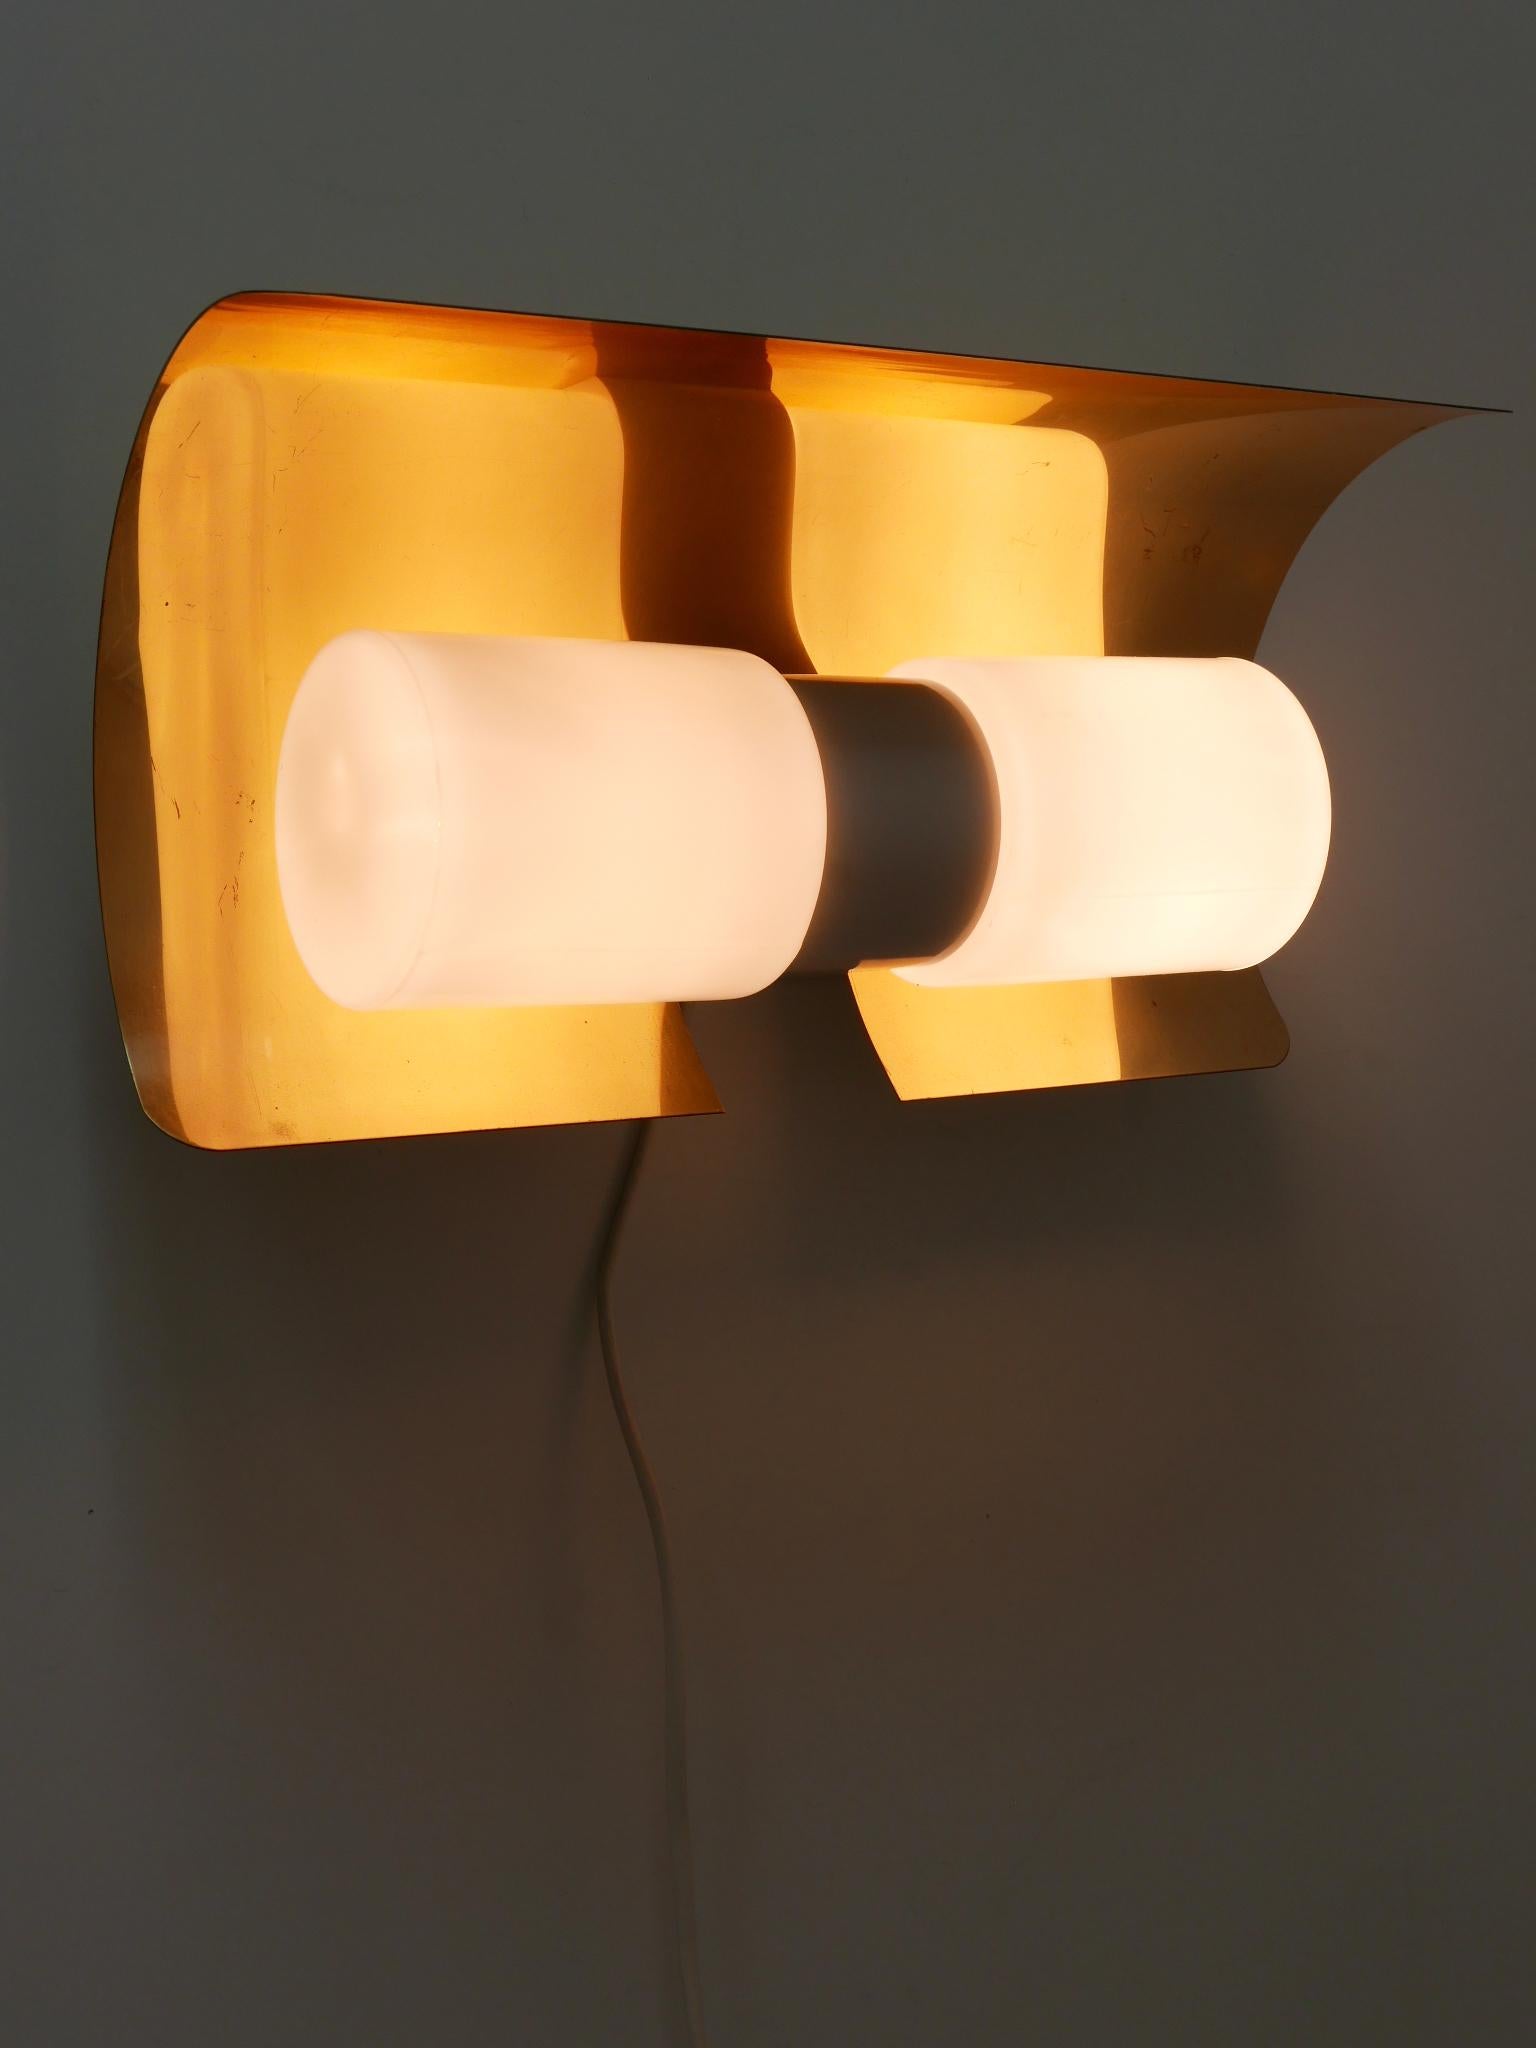 Rare Mid Century Modern Sconce by Hans-Agne Jakobsson for AB Markaryd 1950s For Sale 5